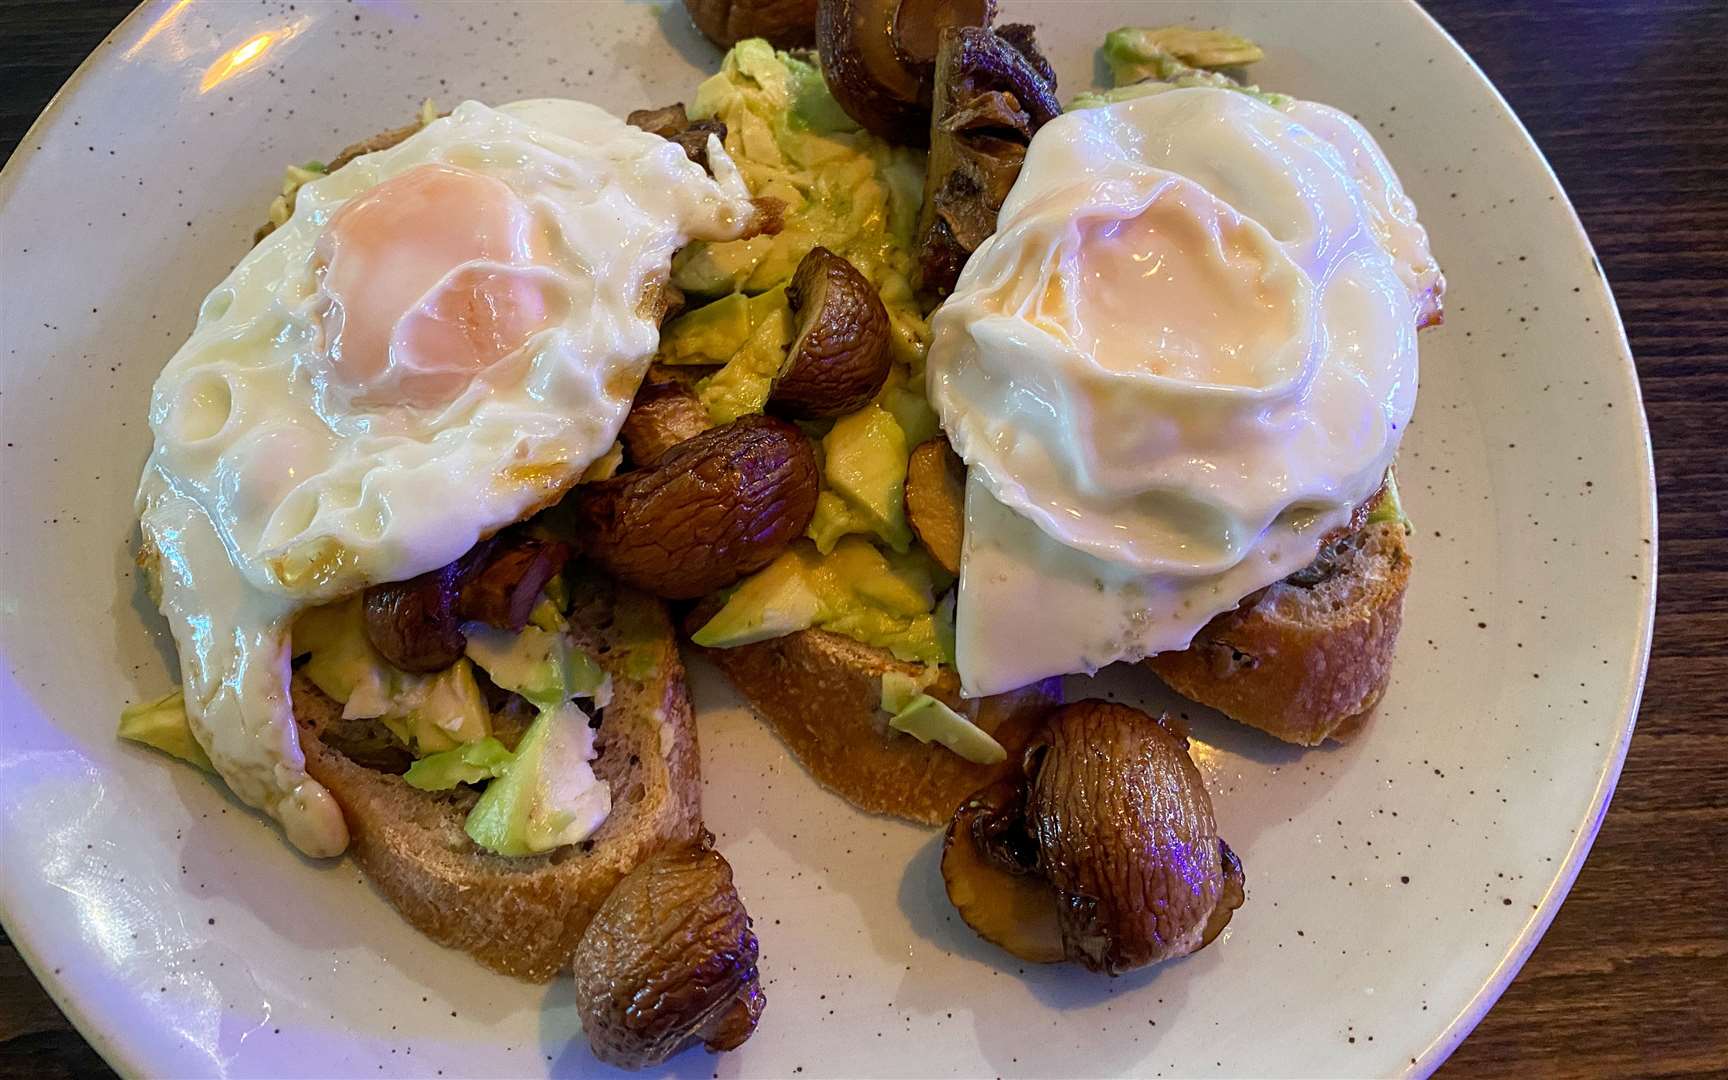 The portion size was great, but the avocado, eggs and mushroom on toast was overcooked and underseasoned